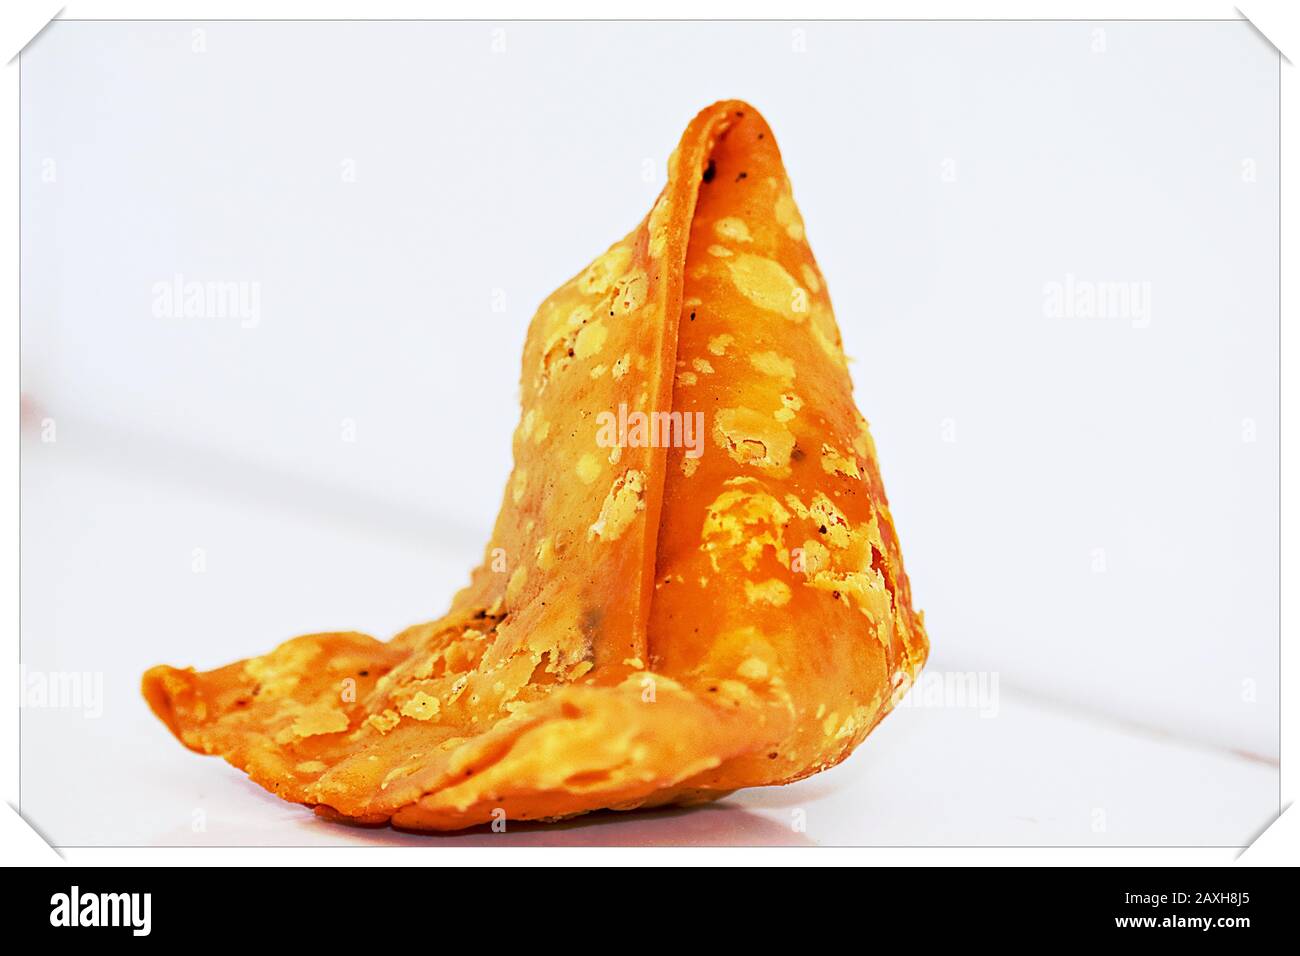 monochrome Vegetarian food potato samosa or samosas. Indian special traditional street food. Famous Indian food samosa filled with potato mixture, Ind Stock Photo